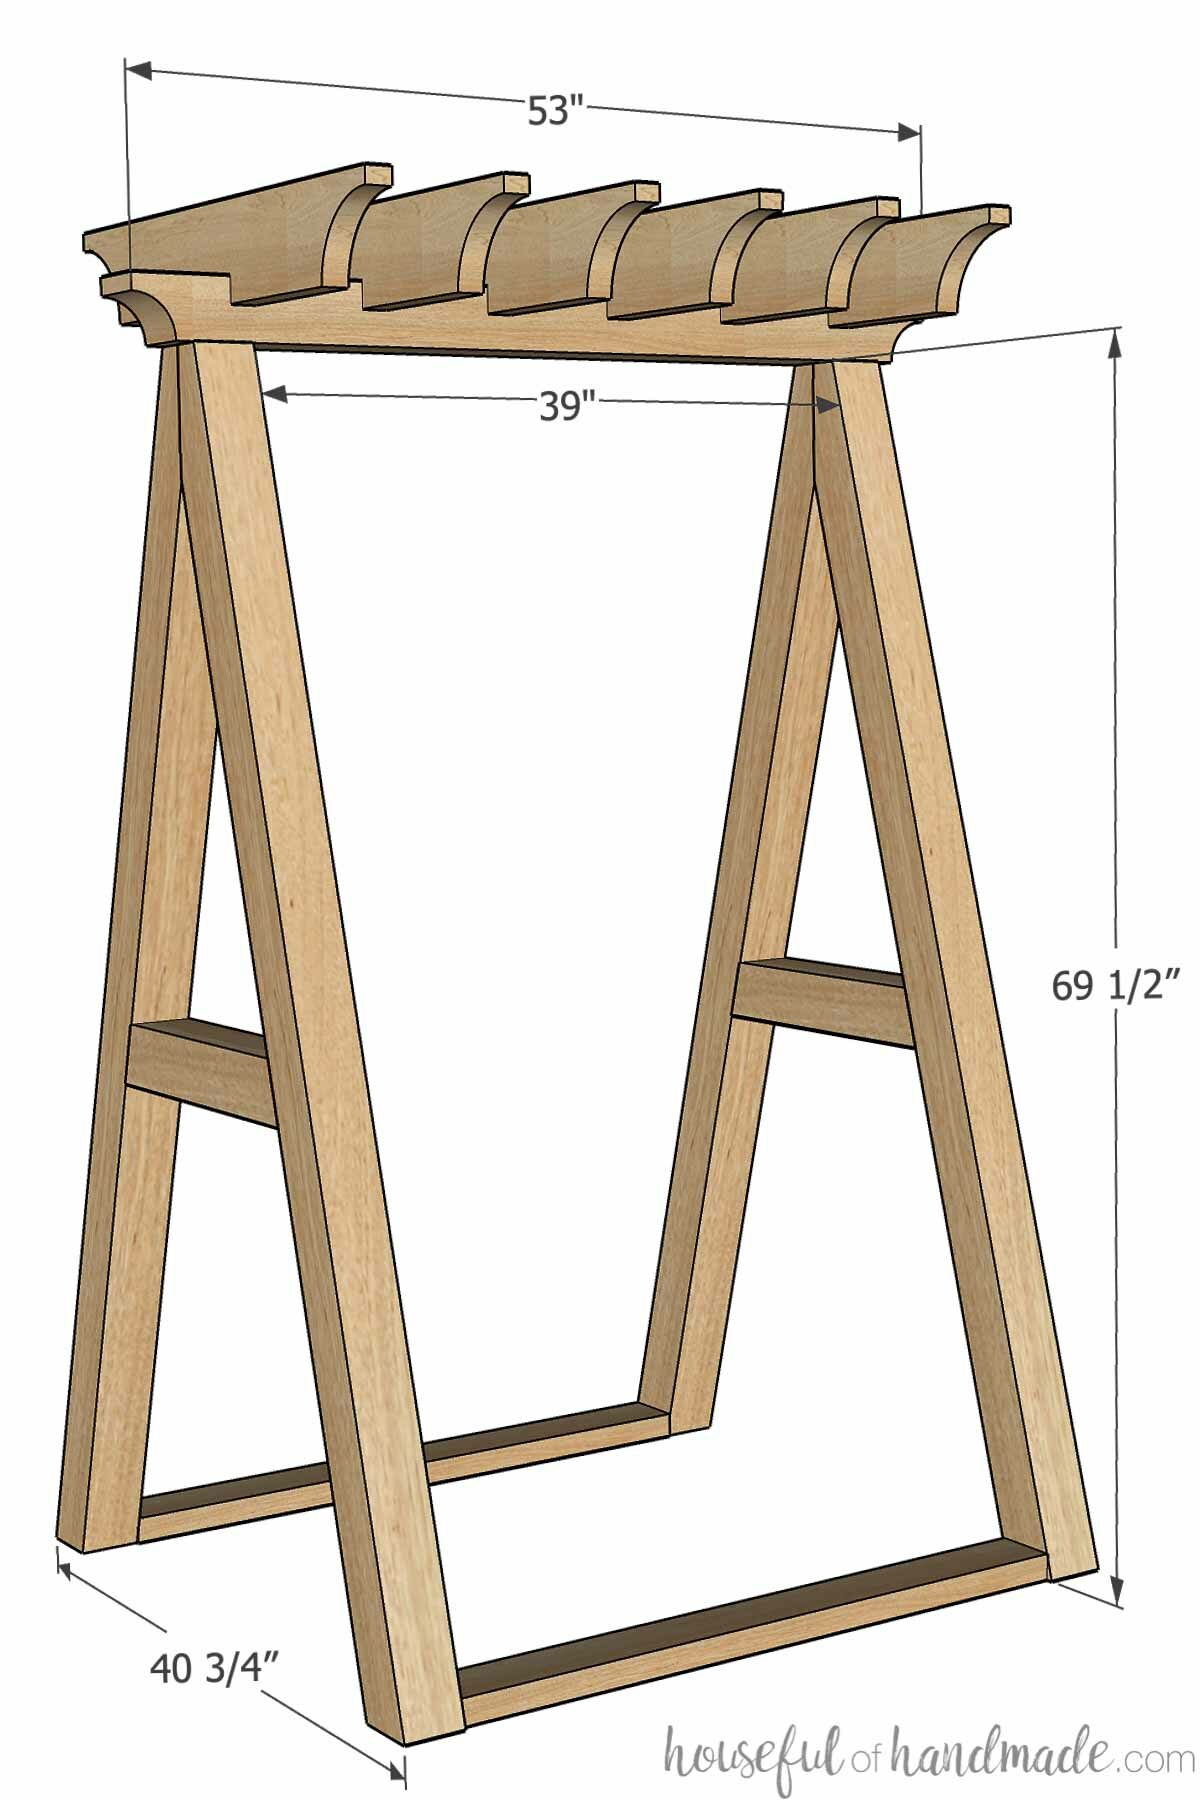 3D Sketch of the hammock chair stand DIY.